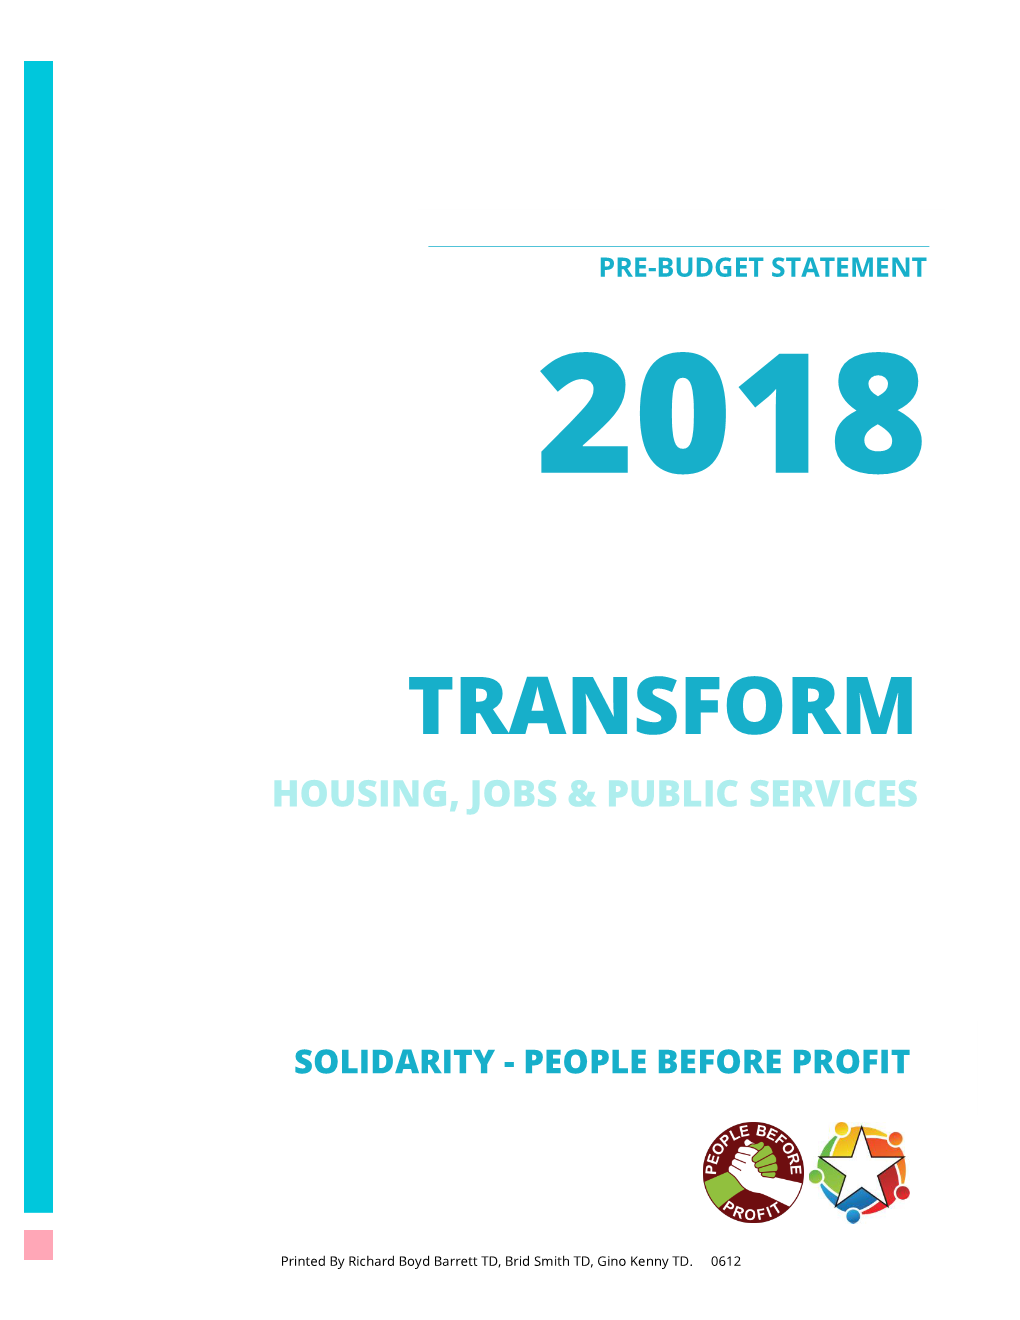 Solidarity-People Before Profit. Pre-Budget Statement 2018. 2